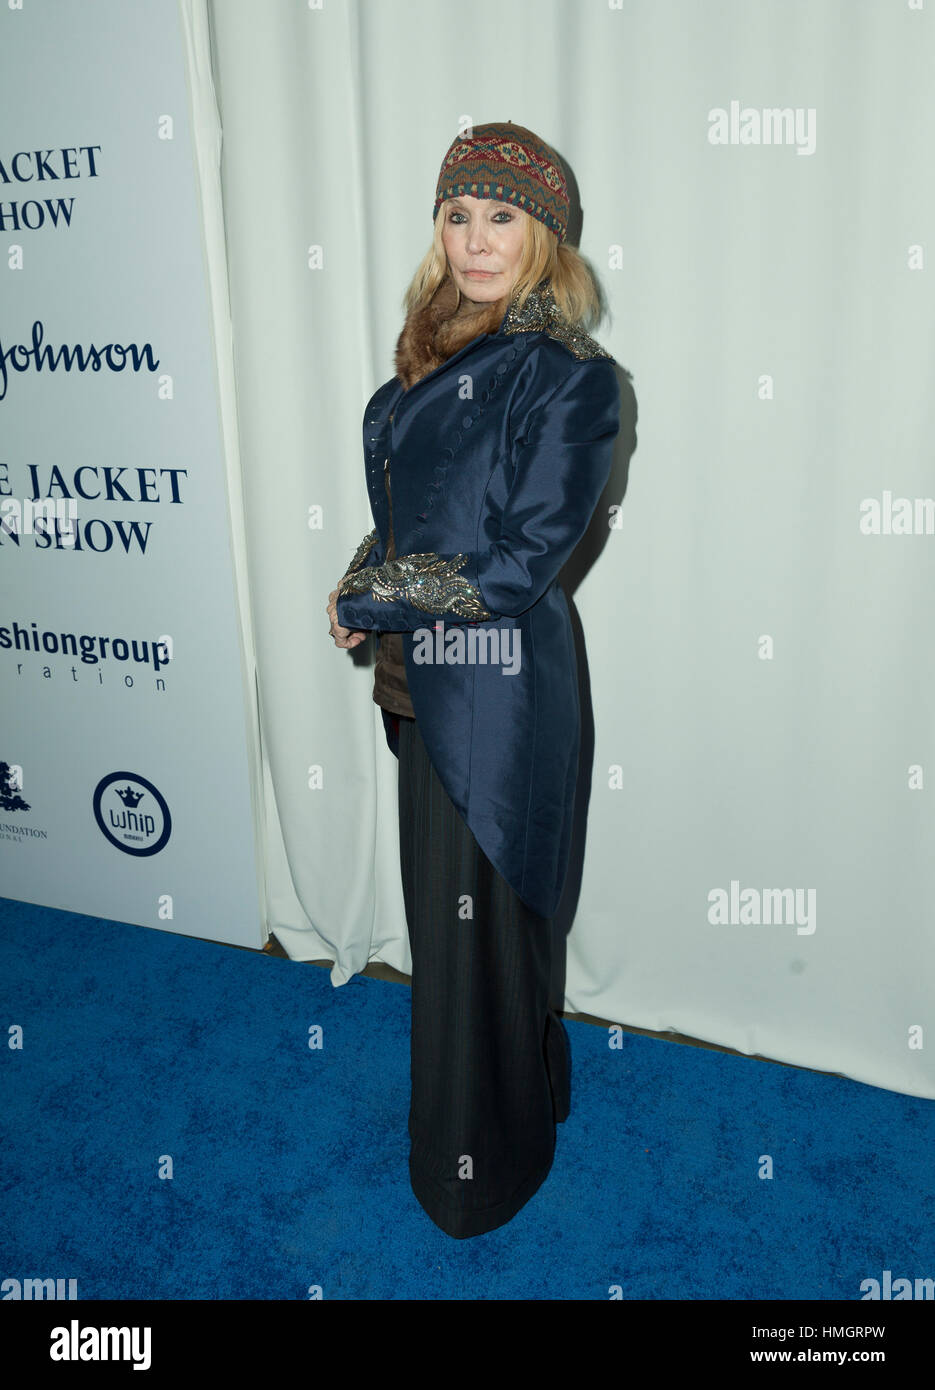 New York, NY USA - February 1, 2017: Maggie Norris attends the blue jacket fashon show in support for prostate cancer awarness during New York Fashion week at Pier 59 Stock Photo